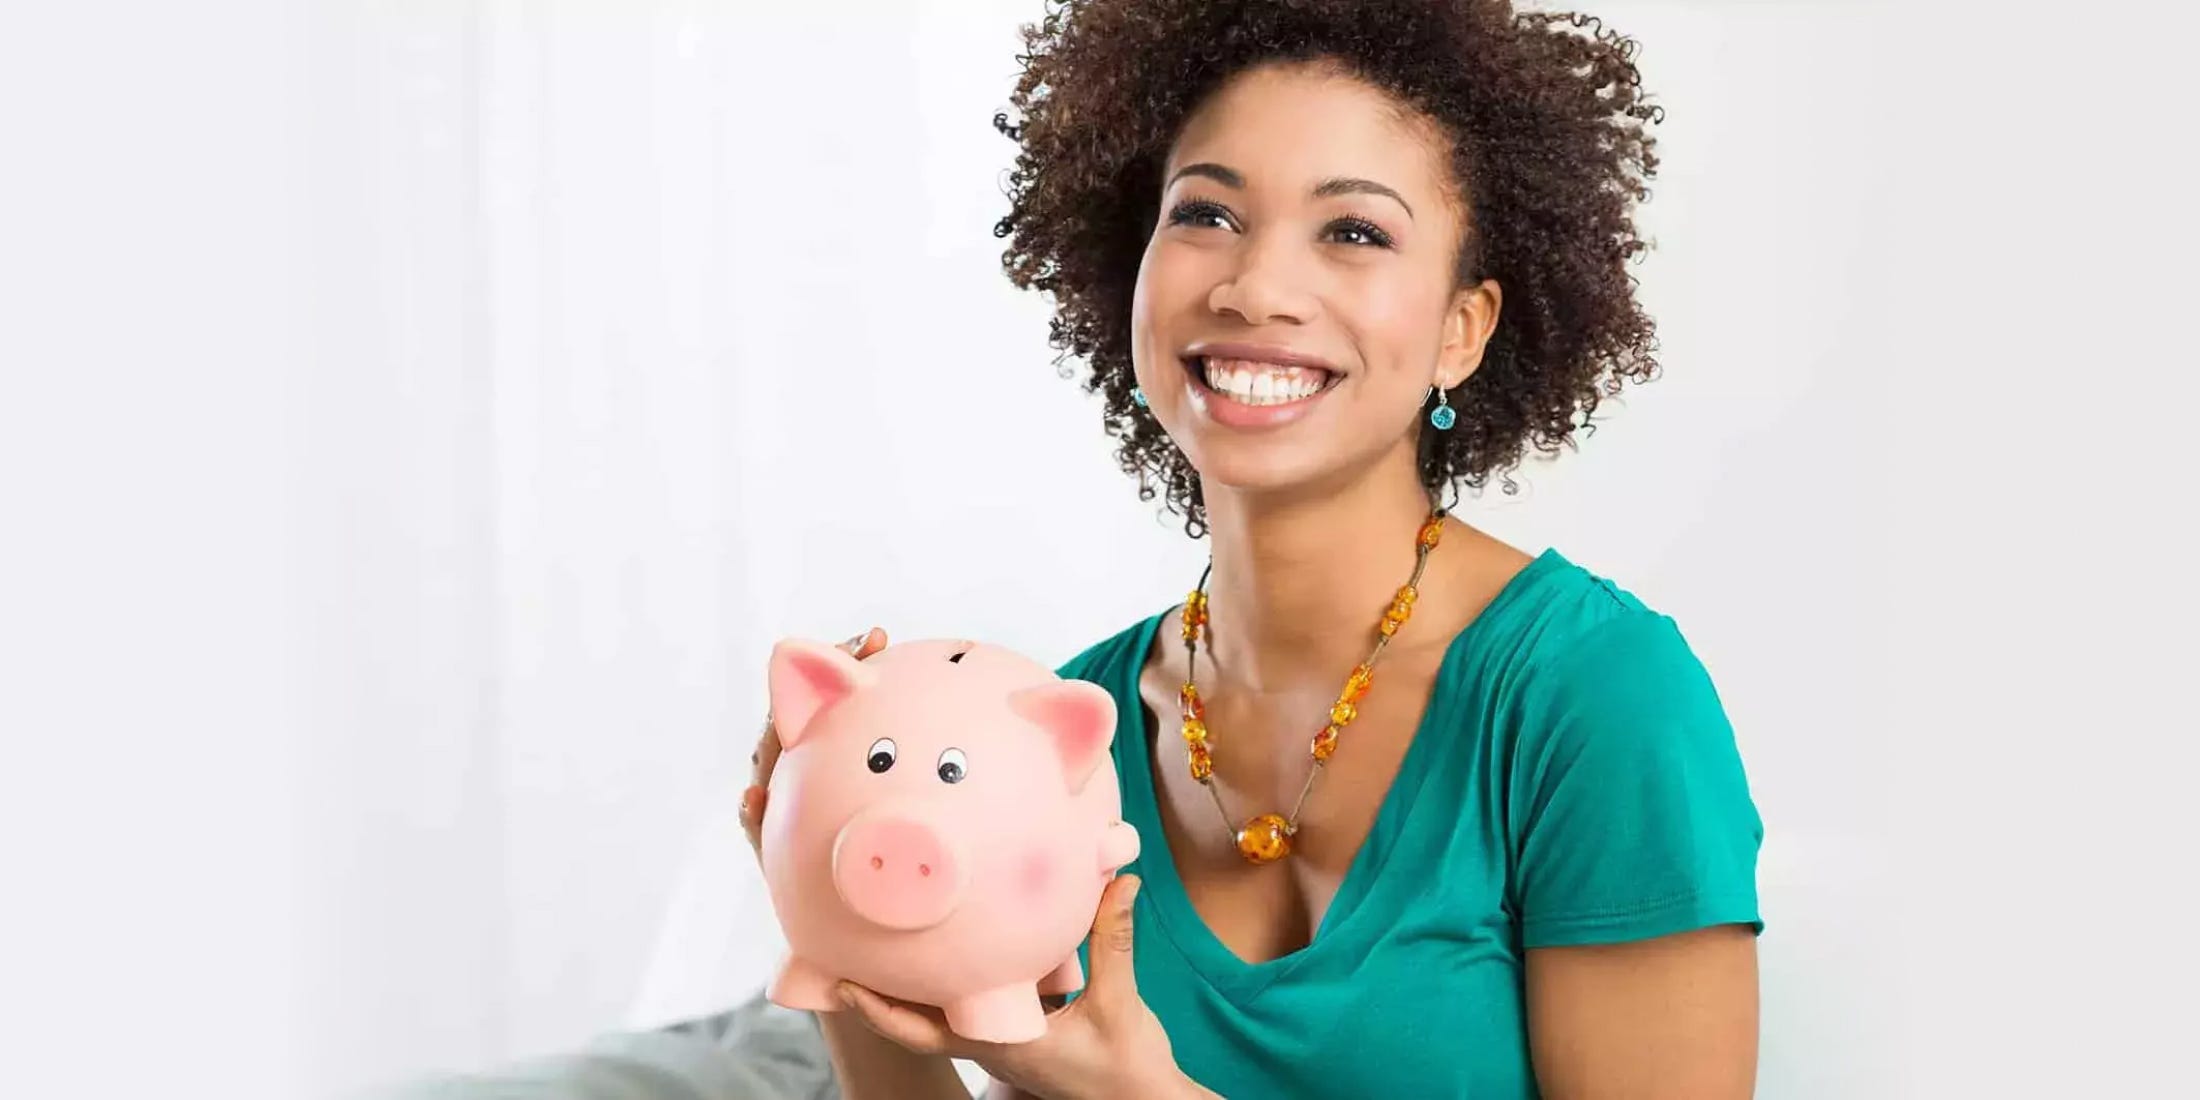 A woman with curly hair and a teal blouse is looking up and smiling while holding a classic, pink piggy bank.